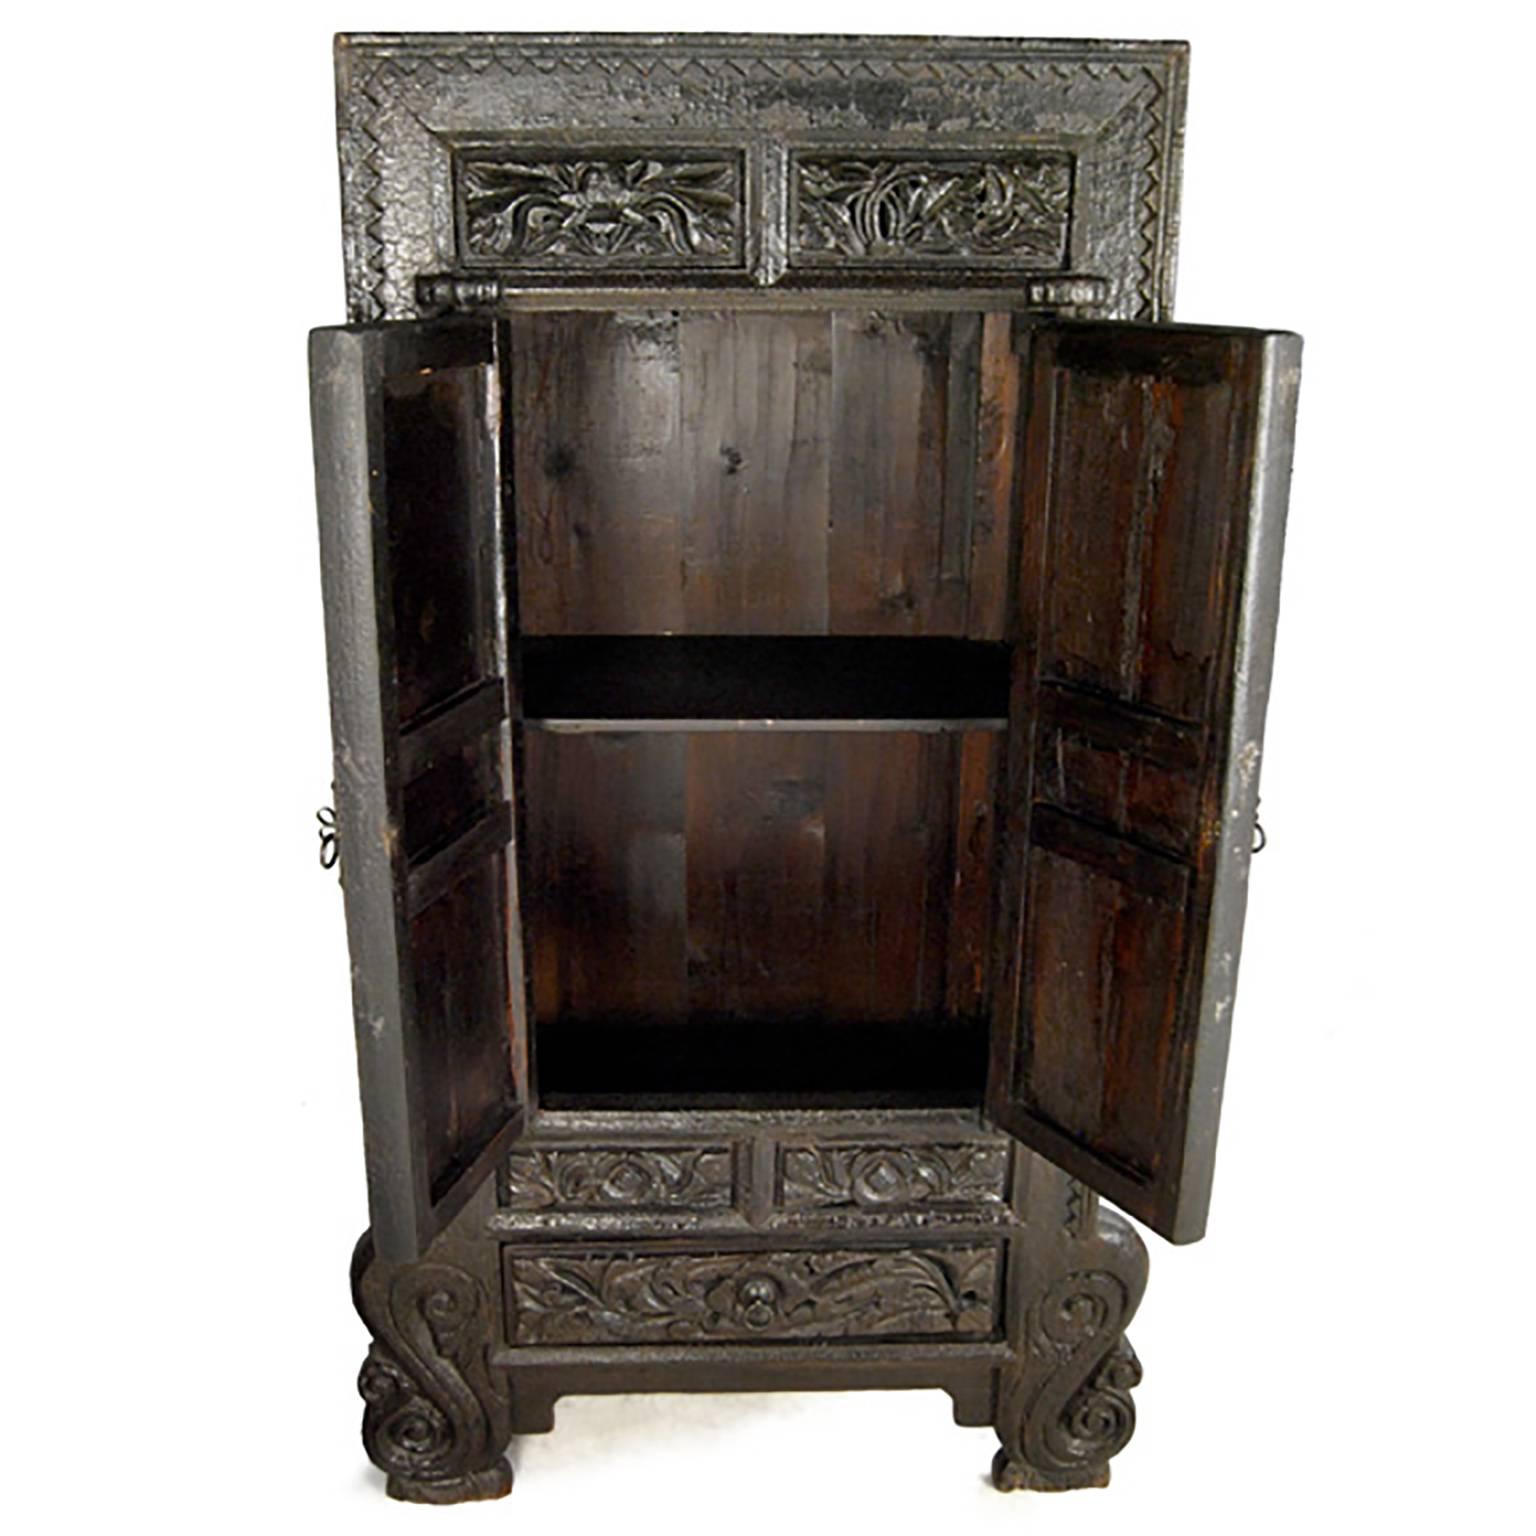 These cabinets were made over 150 year ago in China’s Shanxi Province and are in remarkable condition. They have mitered mortise and tenon frames, the Elmwood has a rich luster, and floating panels carved in beautiful detail. The cabriole legs are